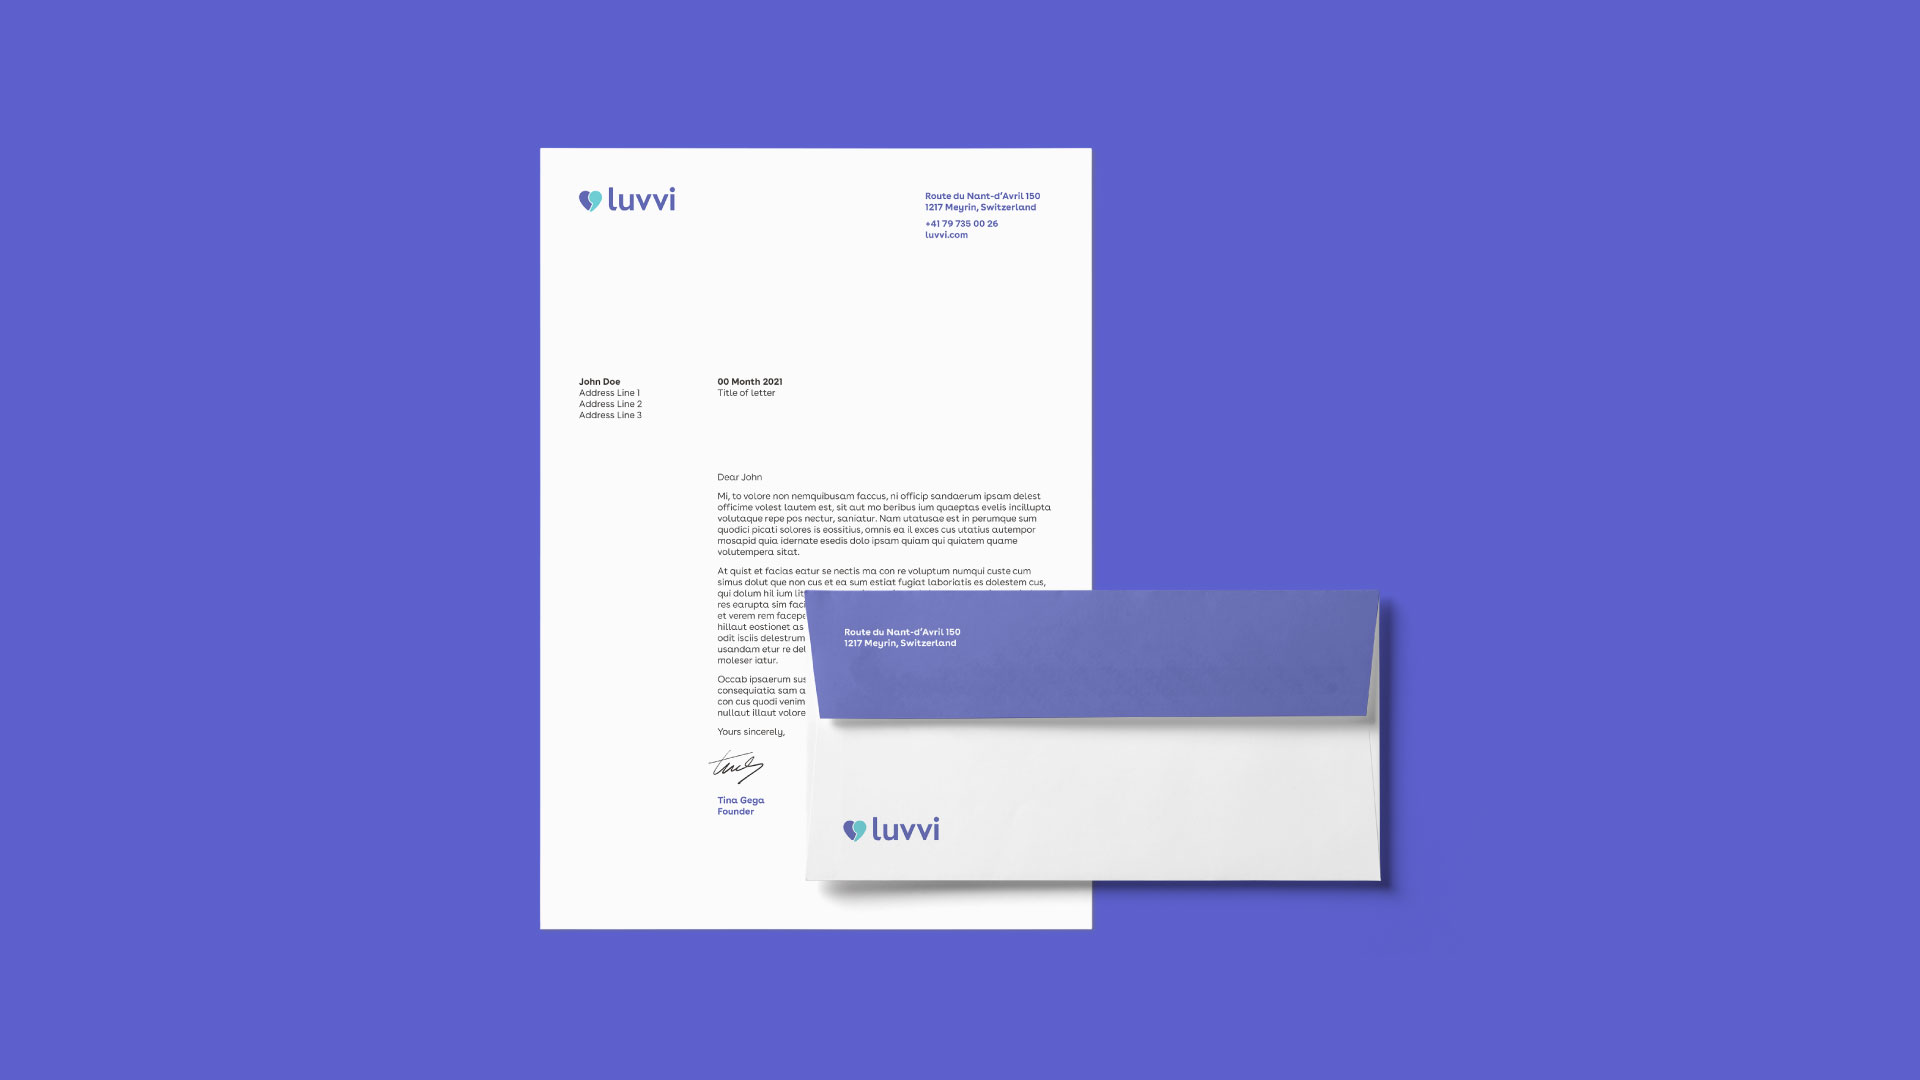 Luvvi branded stationery; a letterhead and bespoke envelope featuring the logo design and company details.